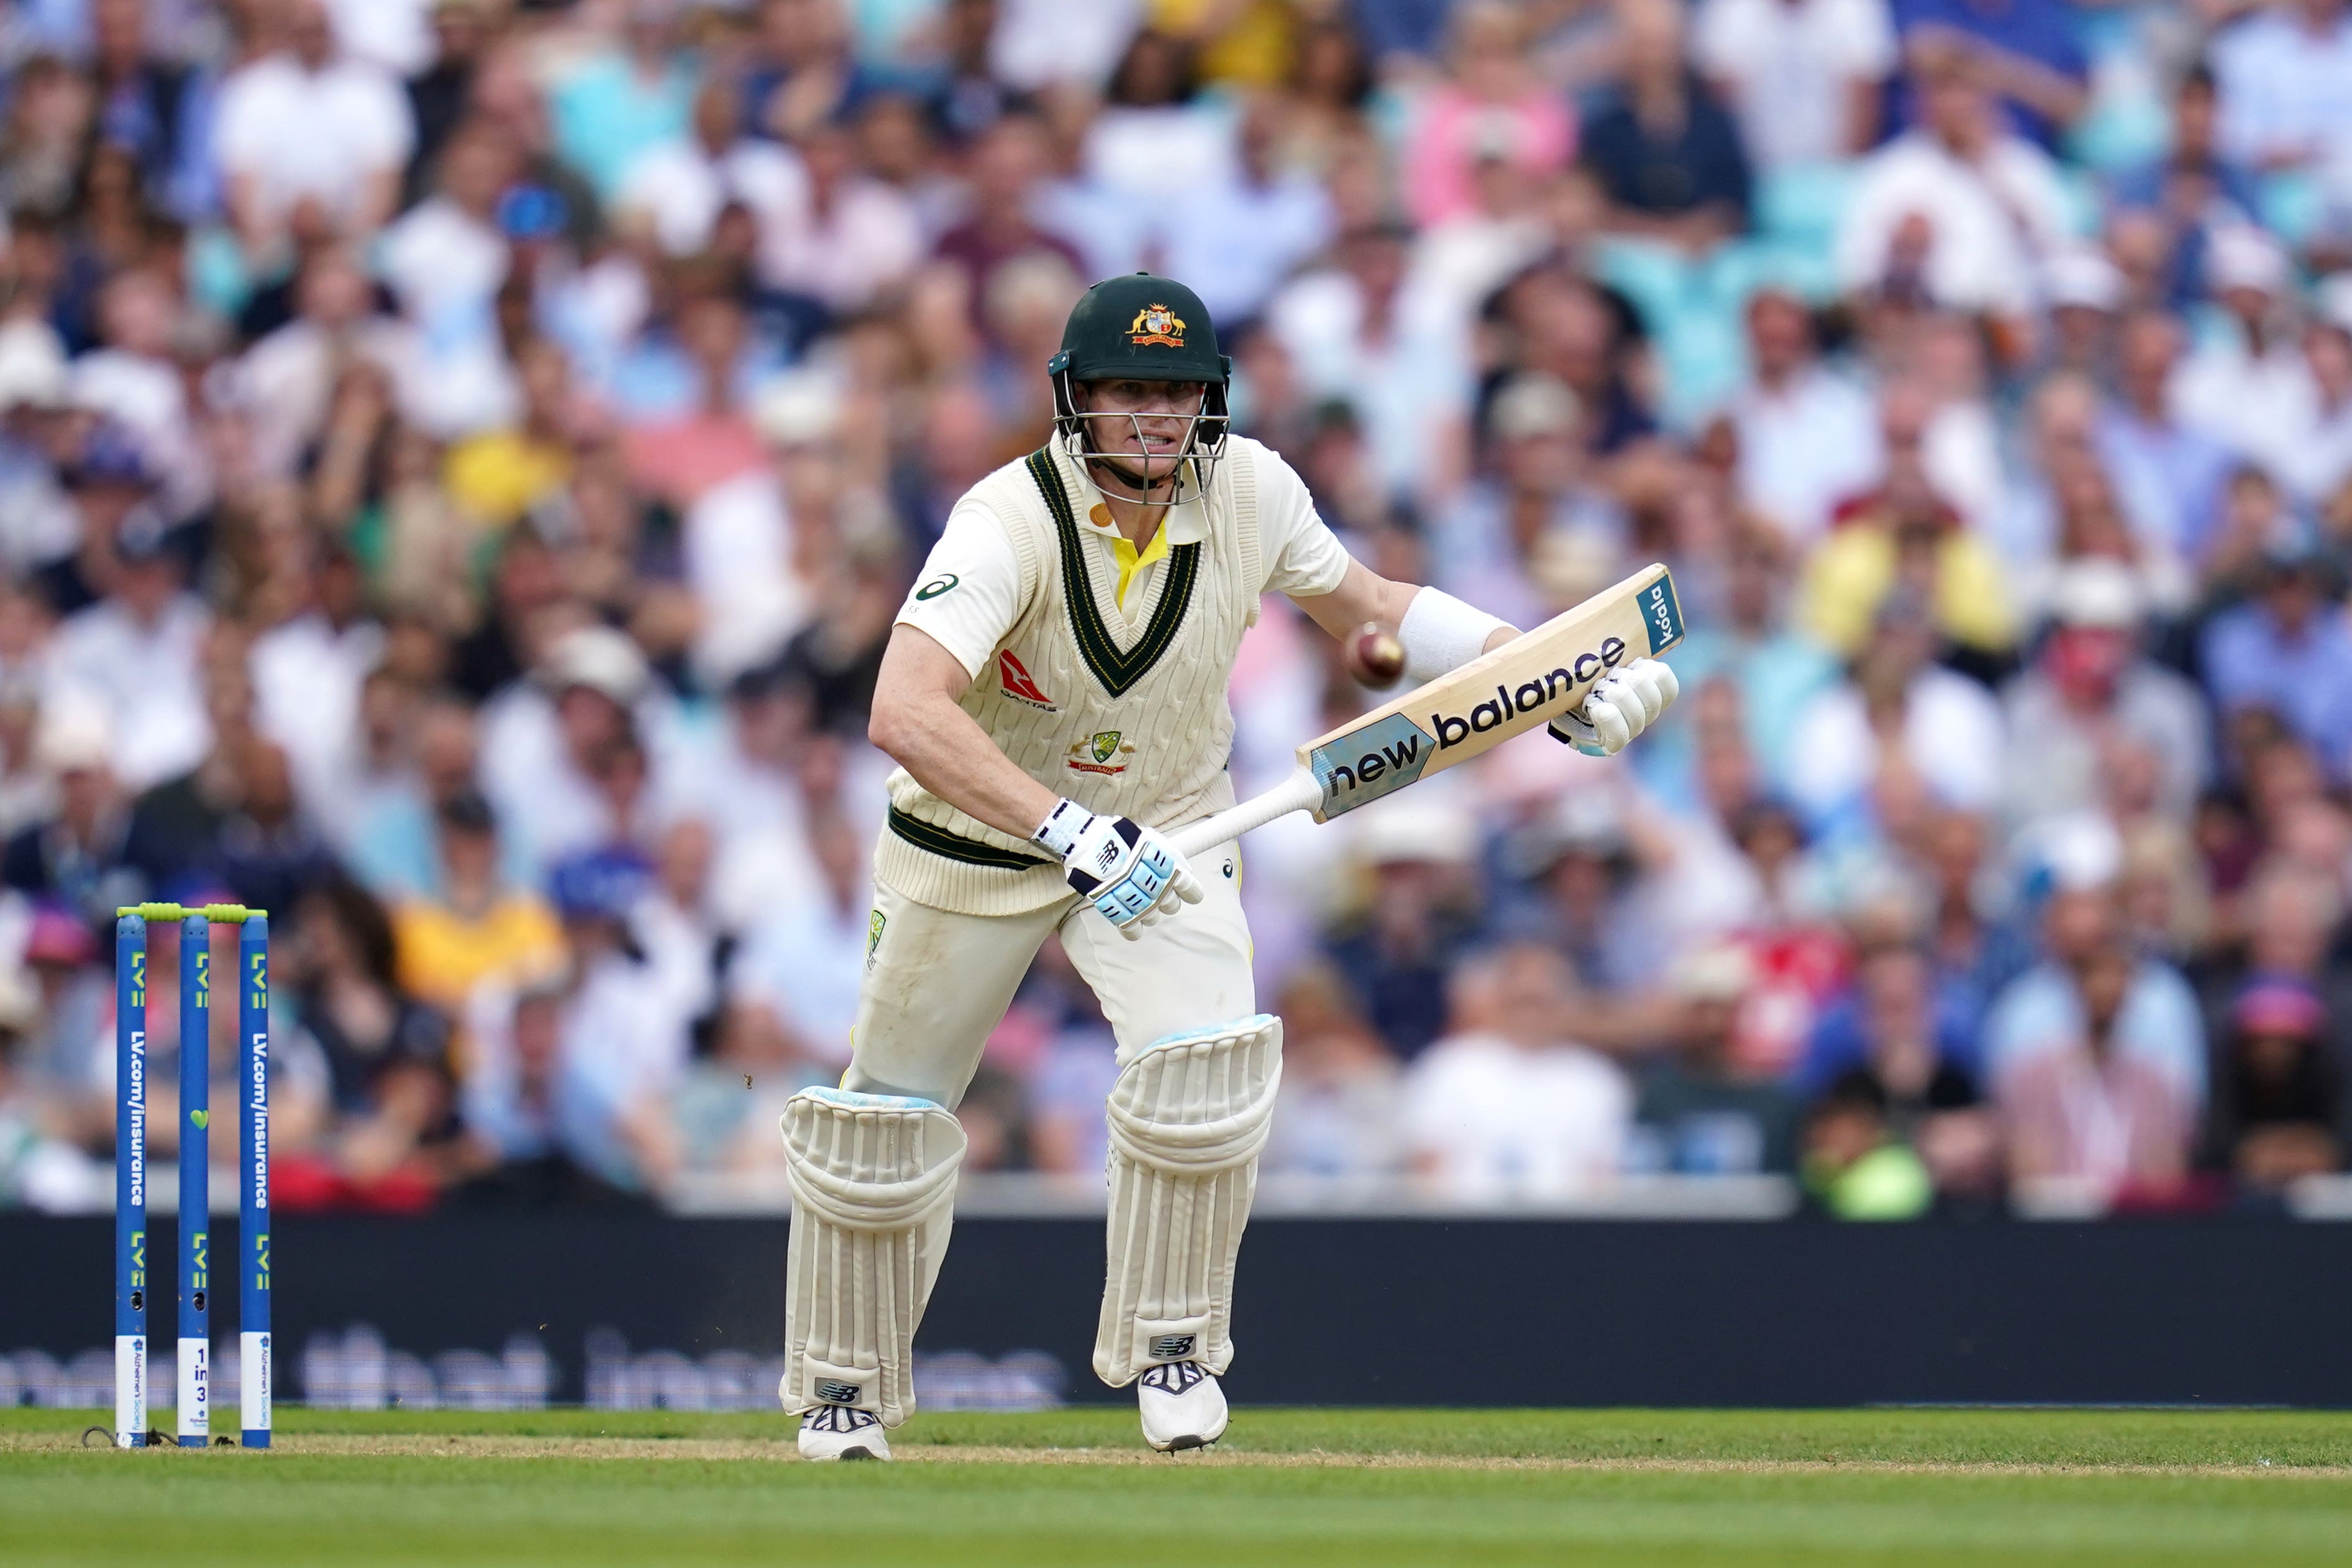 Steve Smith’s returns in Test cricket have dropped off of late